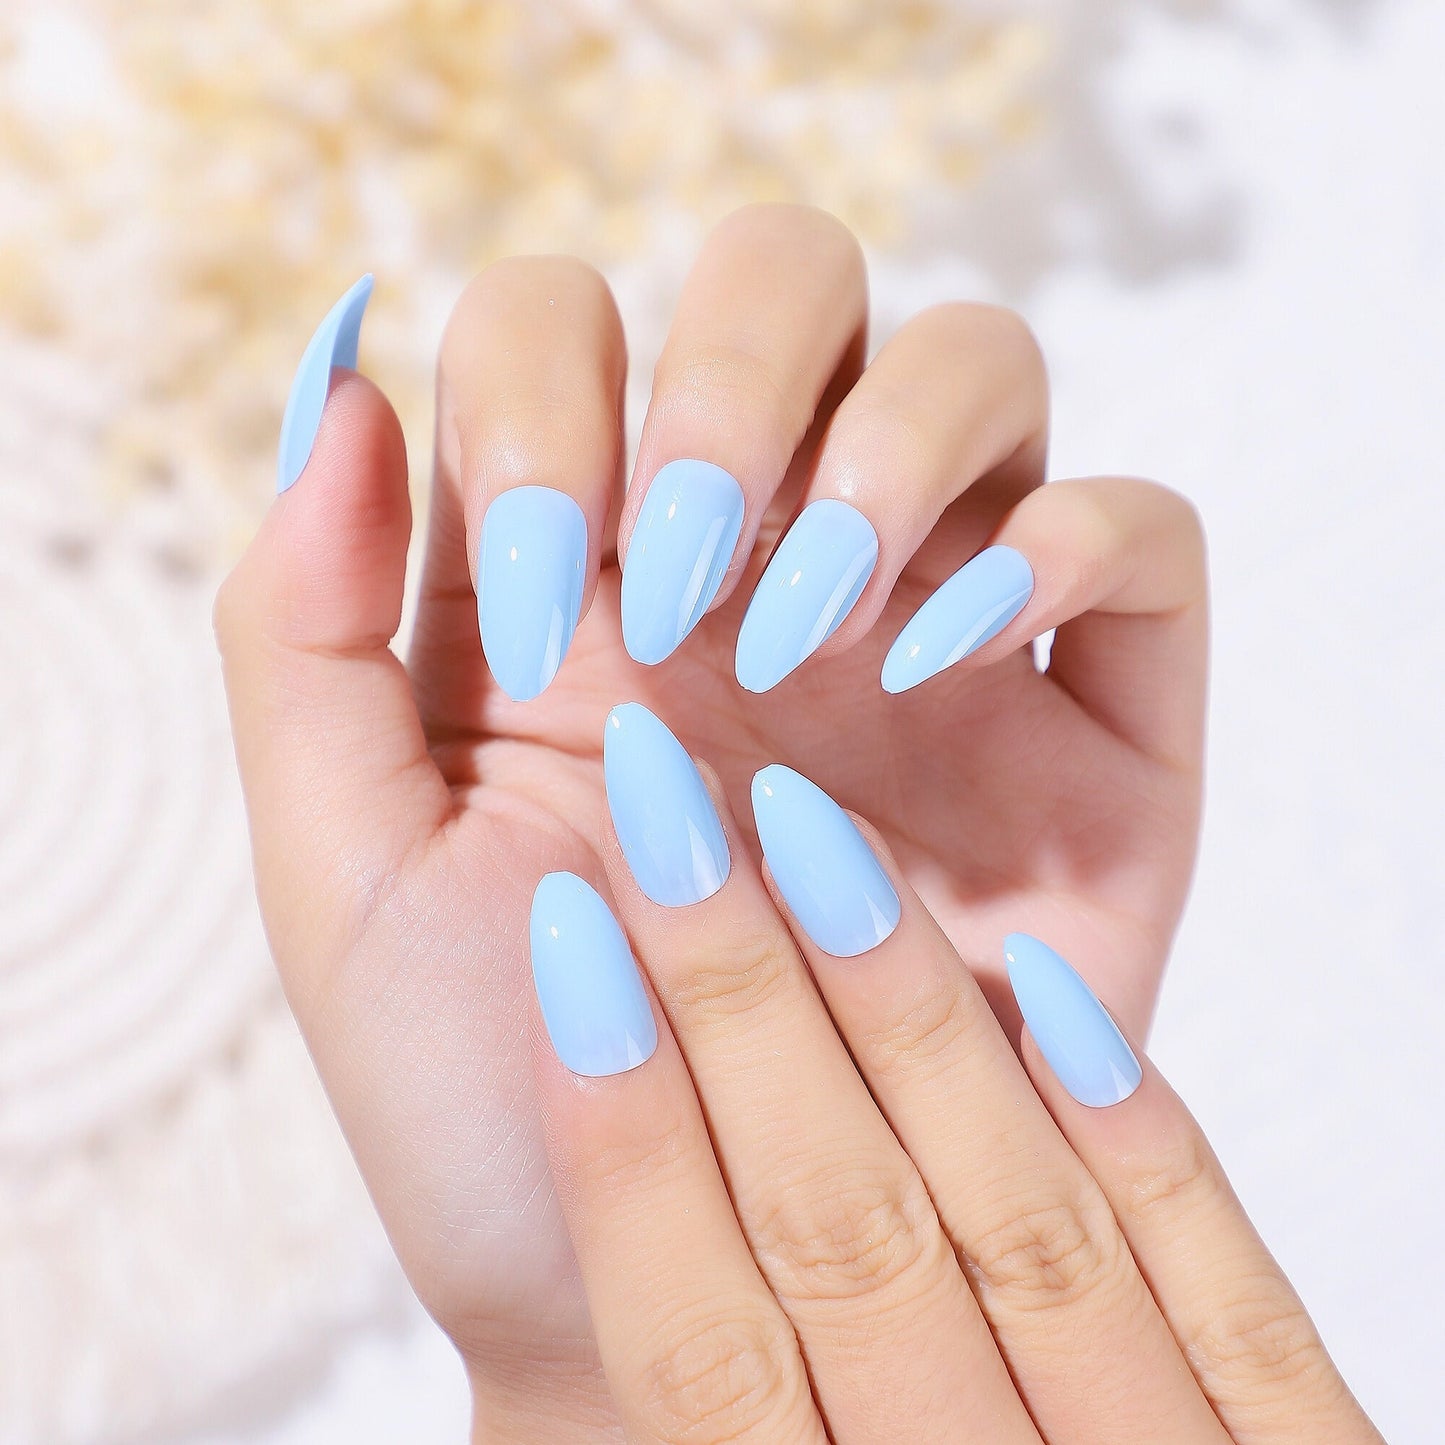 Solid Blue Press On Nails| Baby Blue Sky Blue Light Blue Nails| Press On Nails| Fake Nails| Almond Press On Nail| Press On Nail Almond